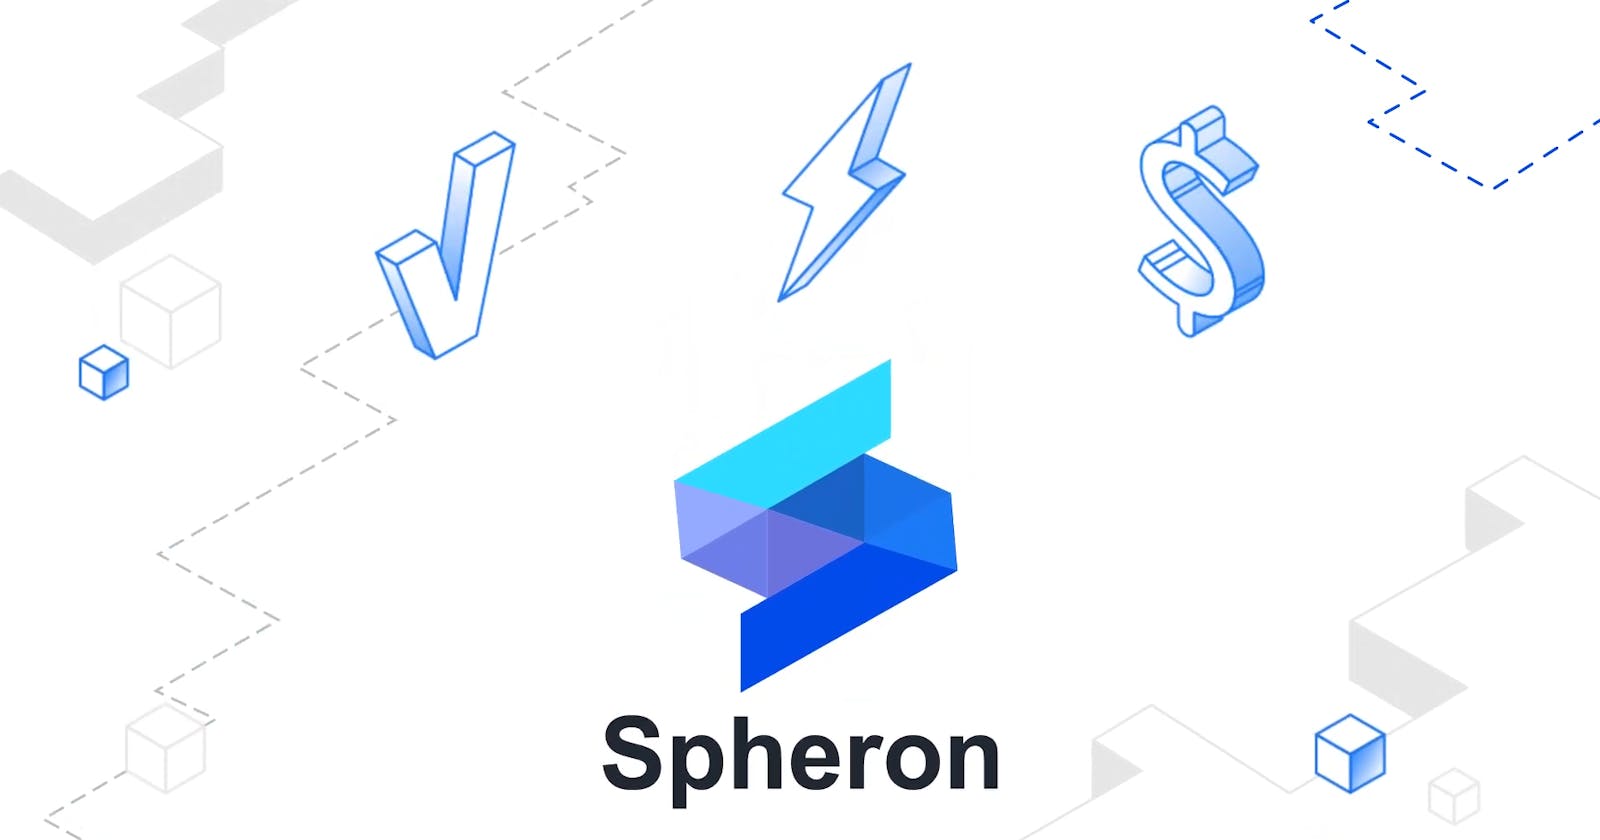 What is Spheron, Why Spheron and What does it do?